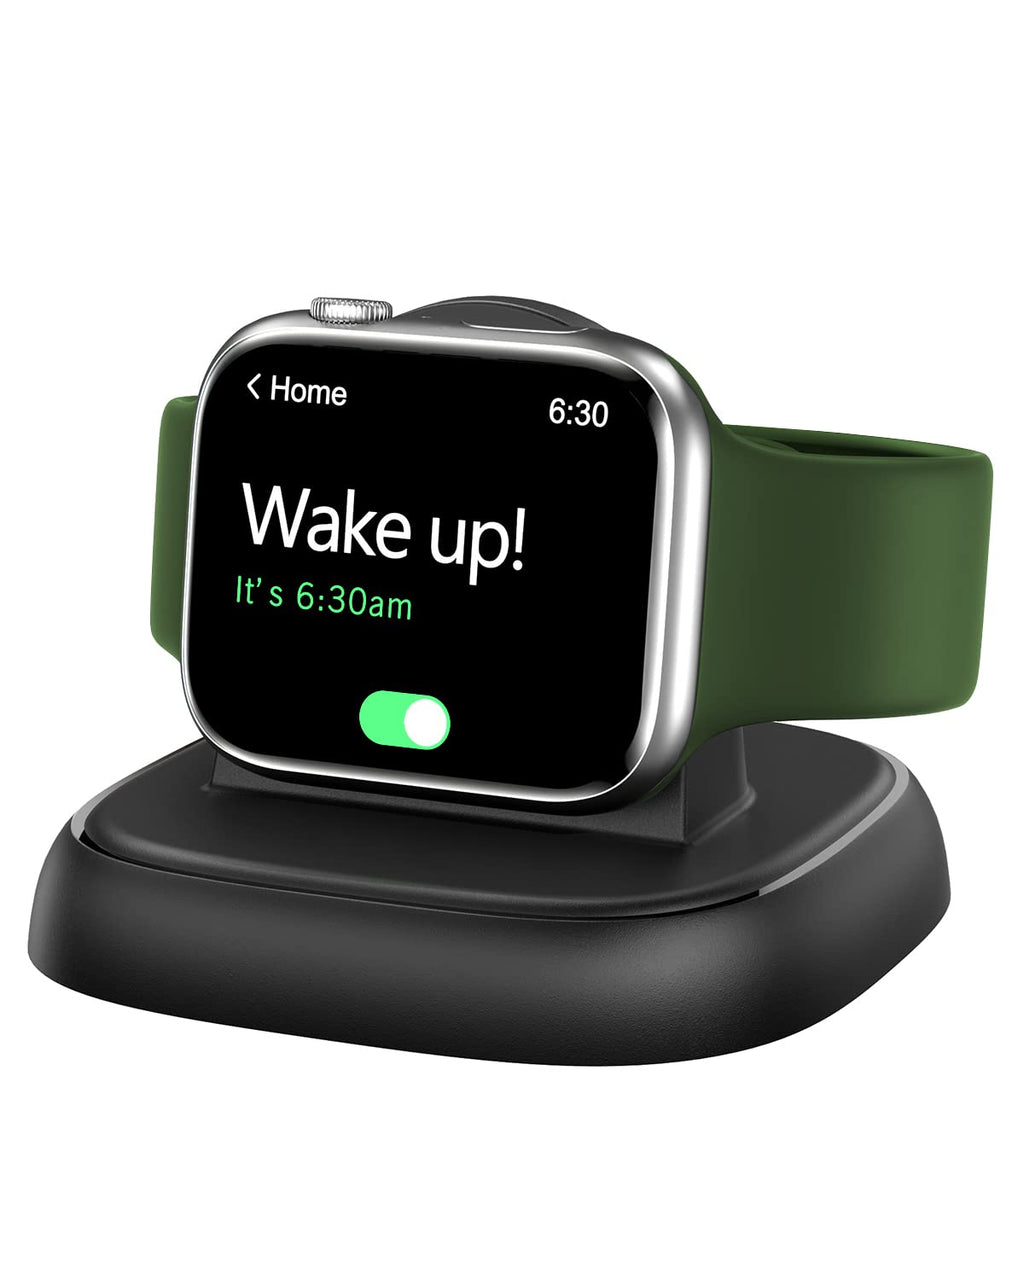 NEWDERY Charger Stand for Apple Watch, Portable Watch Charger for iWatch with USB C Cable,Fast Charging,Wireless Charging Station for iWatch Series 9/8/7/6/Ultra/5/3/2/SE, Black